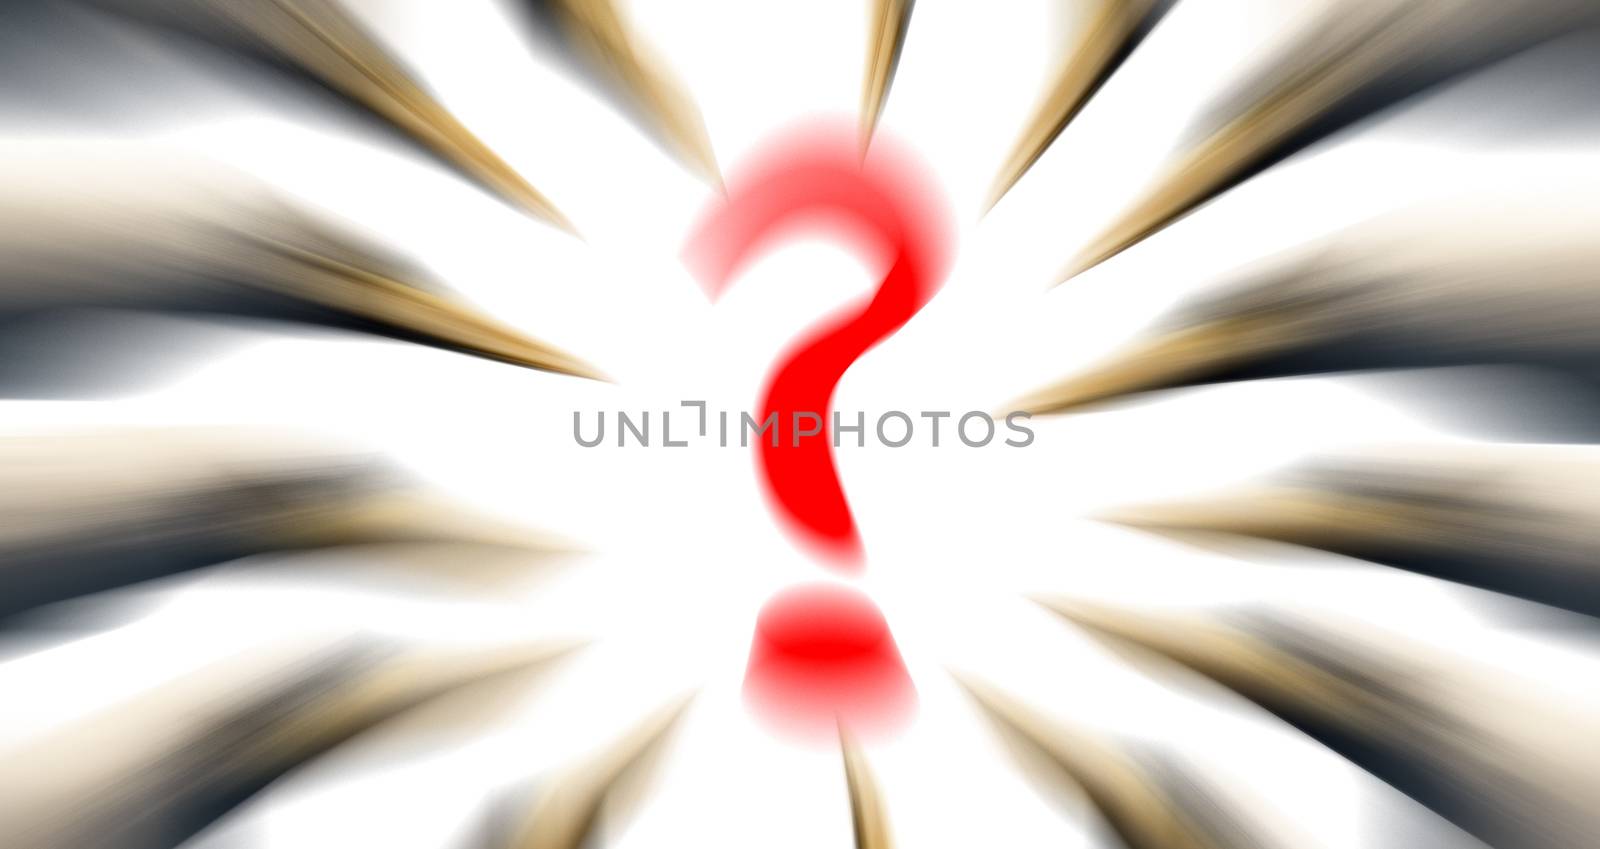 Question mark in red color on white background with a bunch of beaks surrounding it. Blurred image. Illustration.